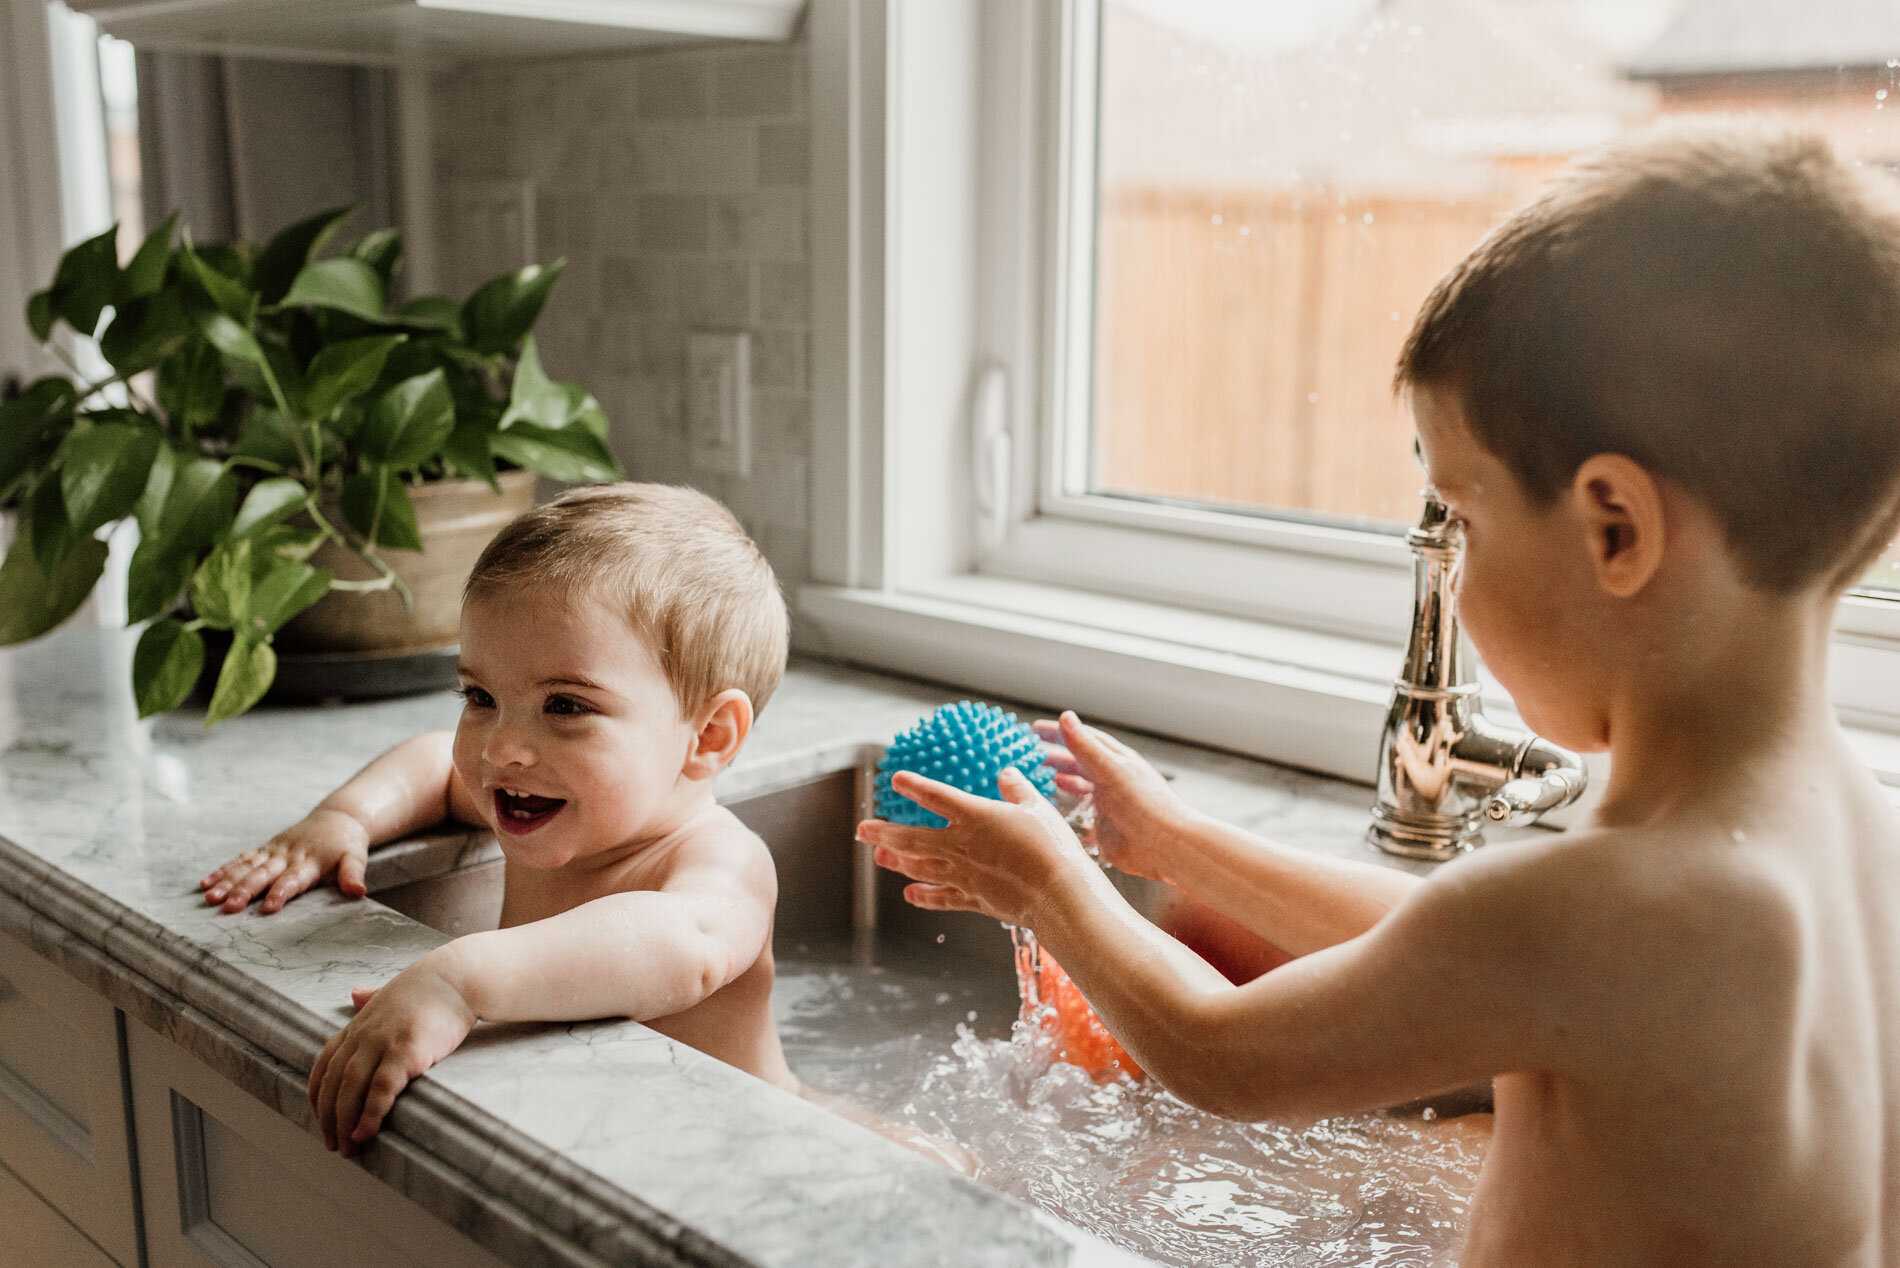 Whitby-photographer-baby-documentary-bath-in-kitchen-sink-fun-picture.JPG